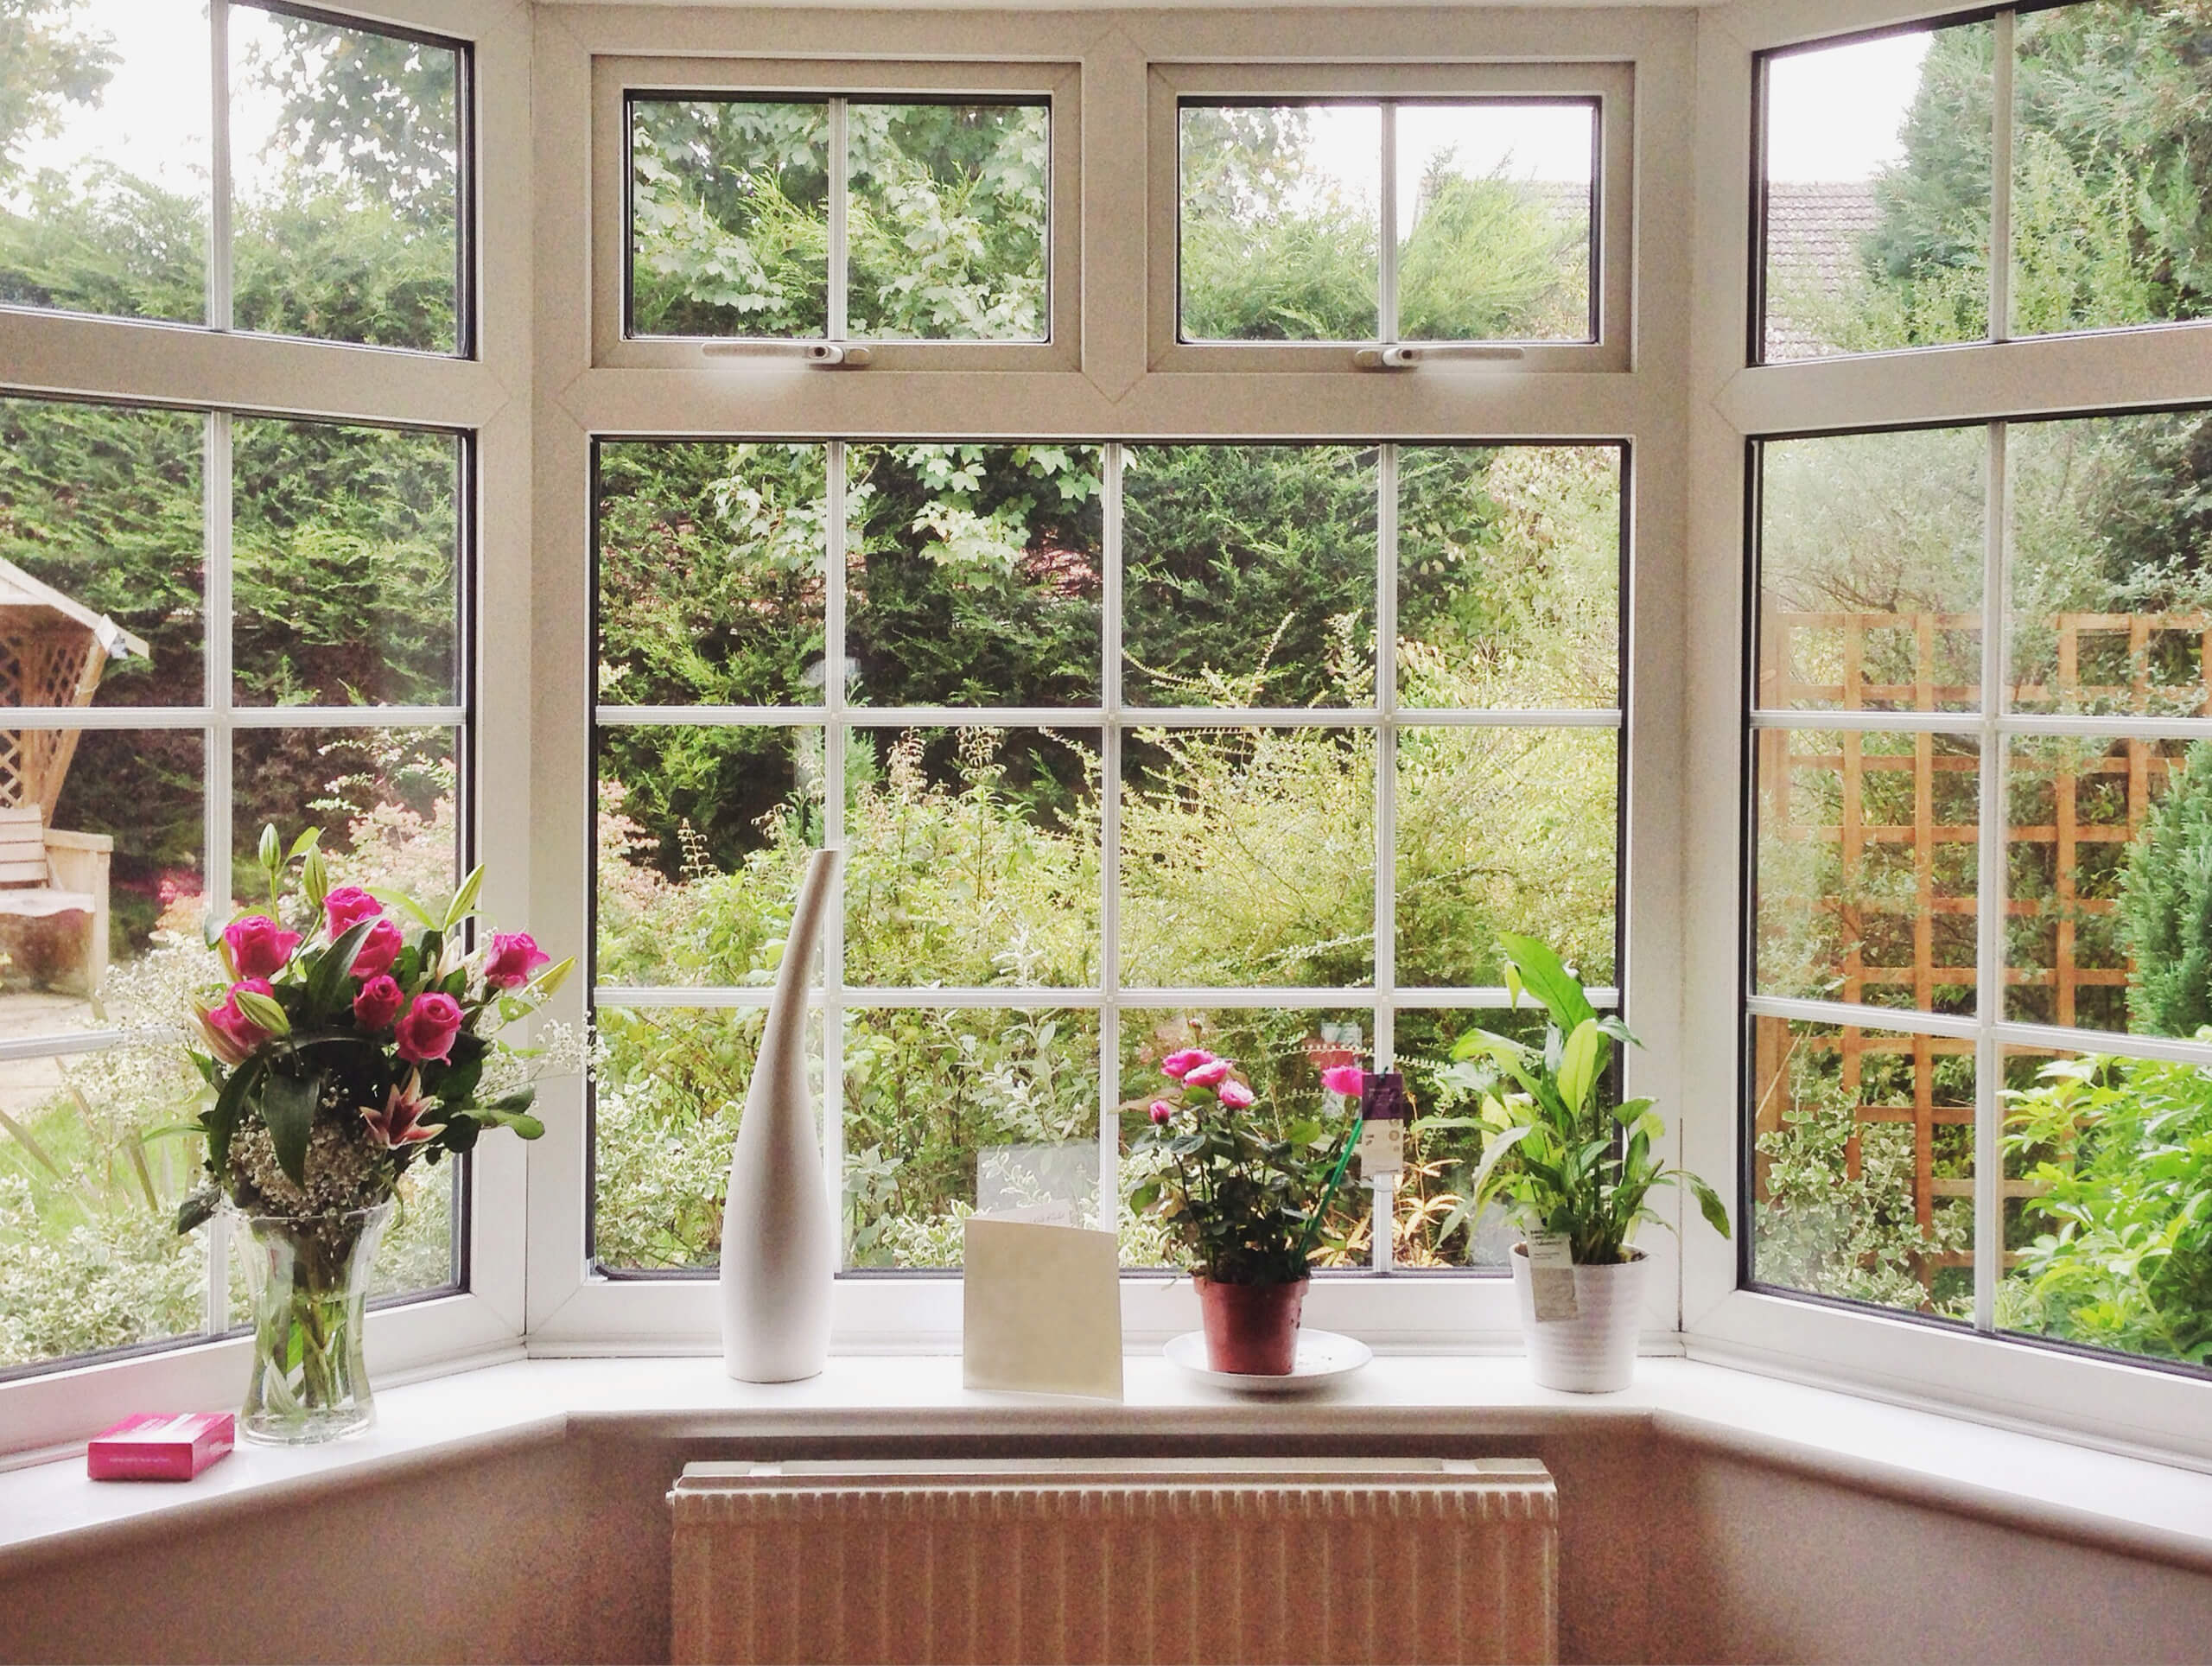 Bay window decorated with vases of flowers